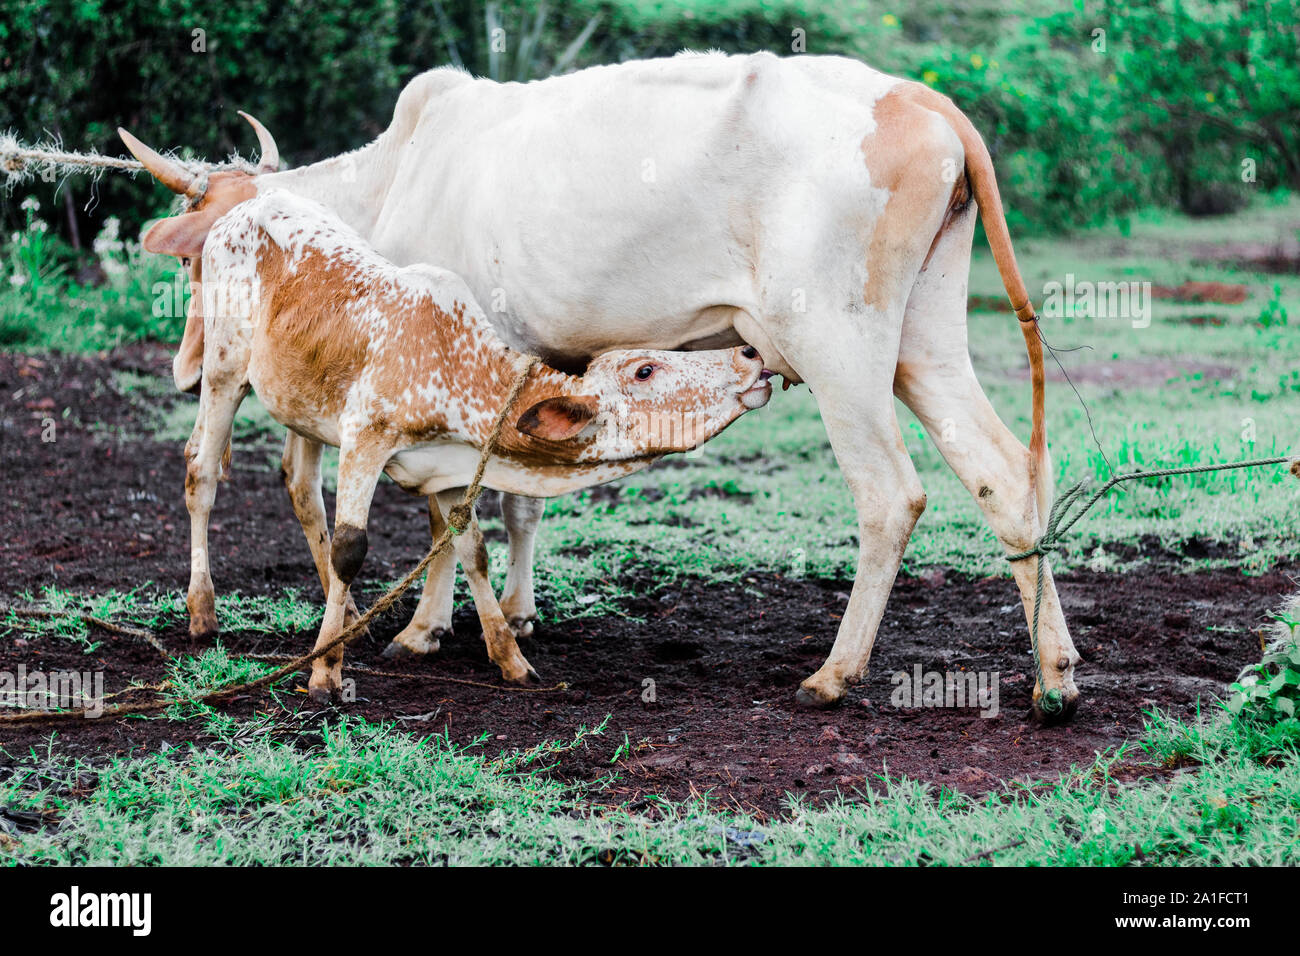 white Calf suckling female cow with horns Stock Photo